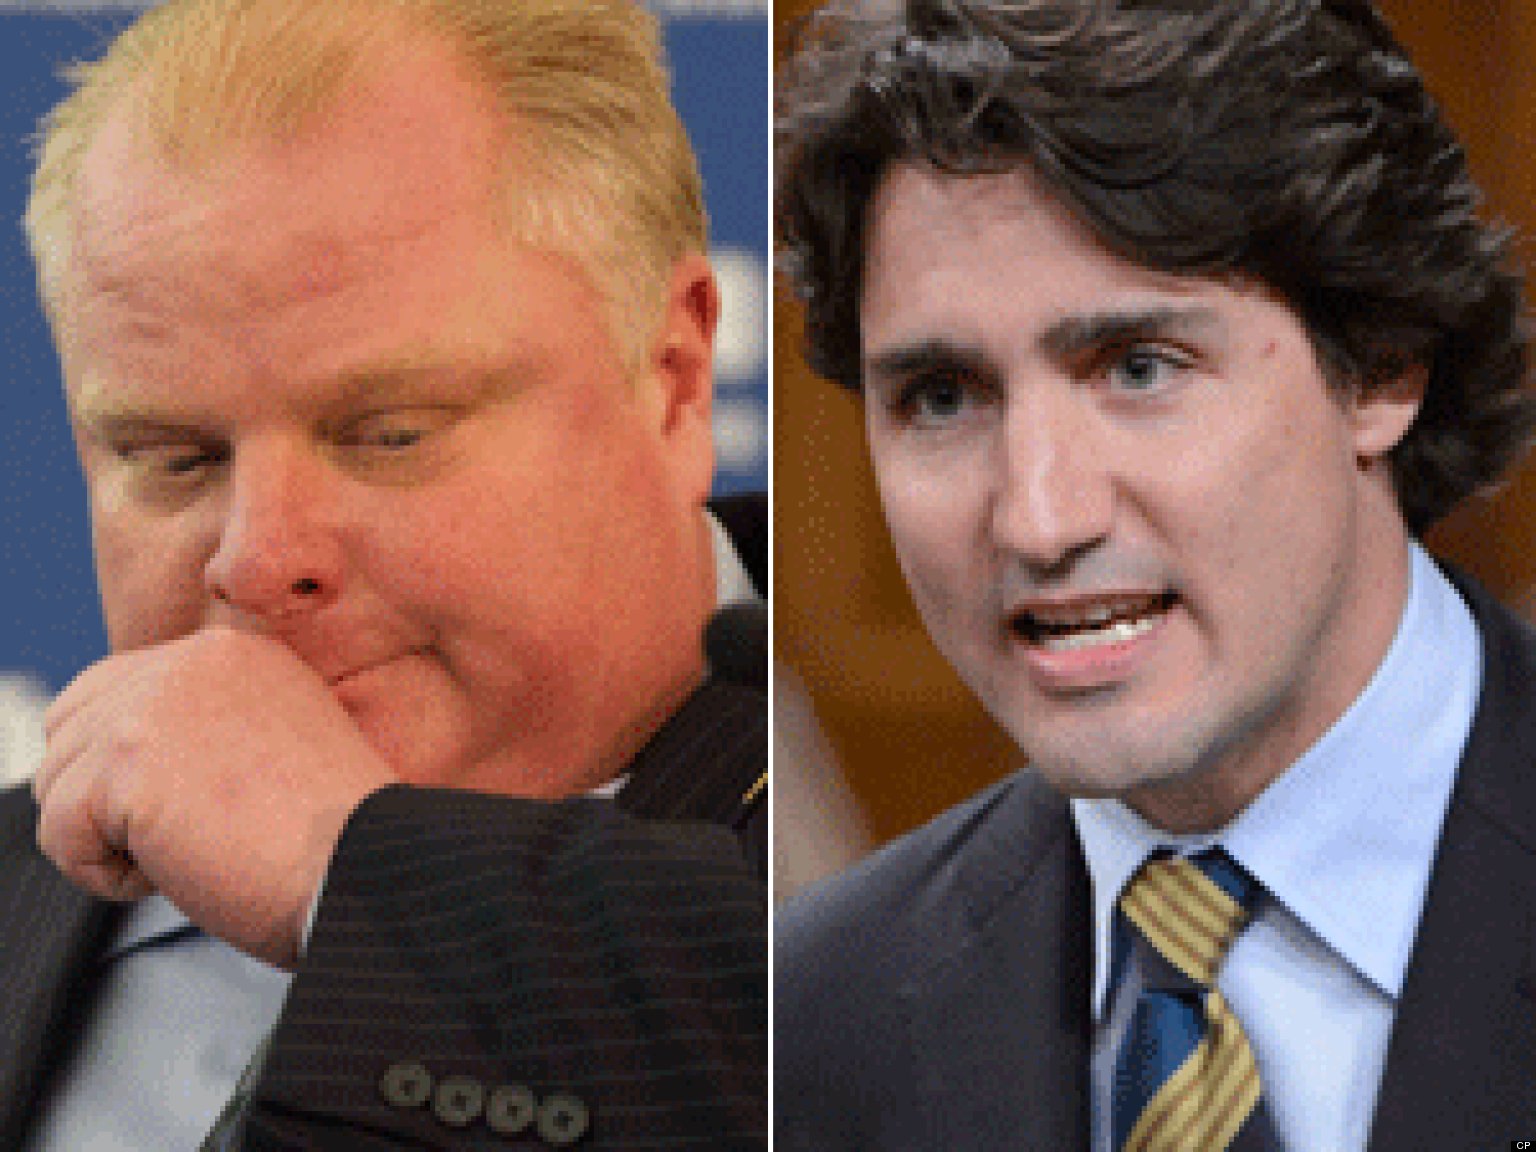 Justin trudeau on rob ford #2